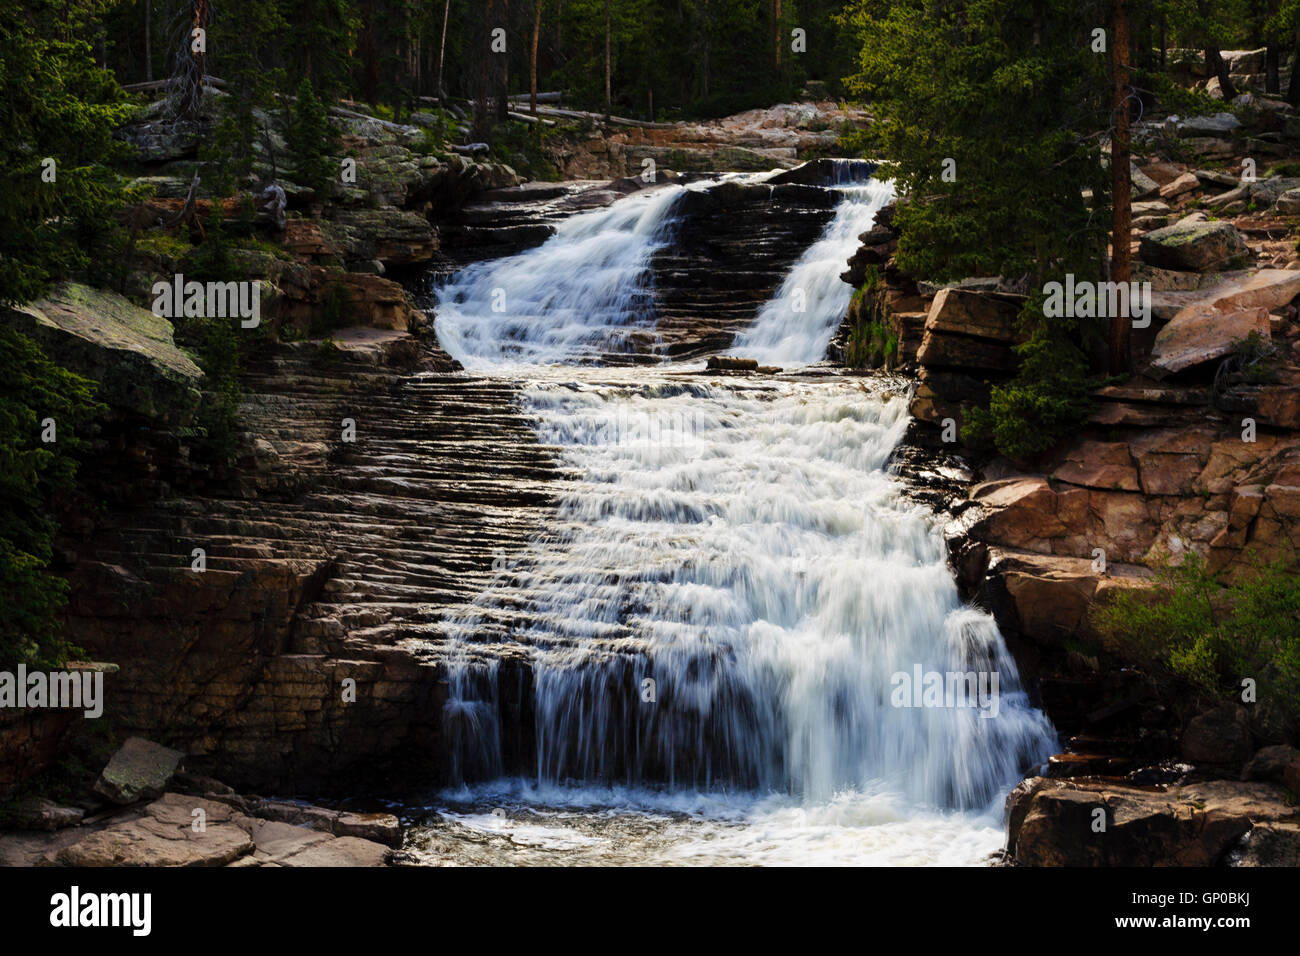 Provo River Falls Overlook, Mirror Lake Scenic Byway, Uinta-Wasatch-Cache National Forest Utah Stock Photo